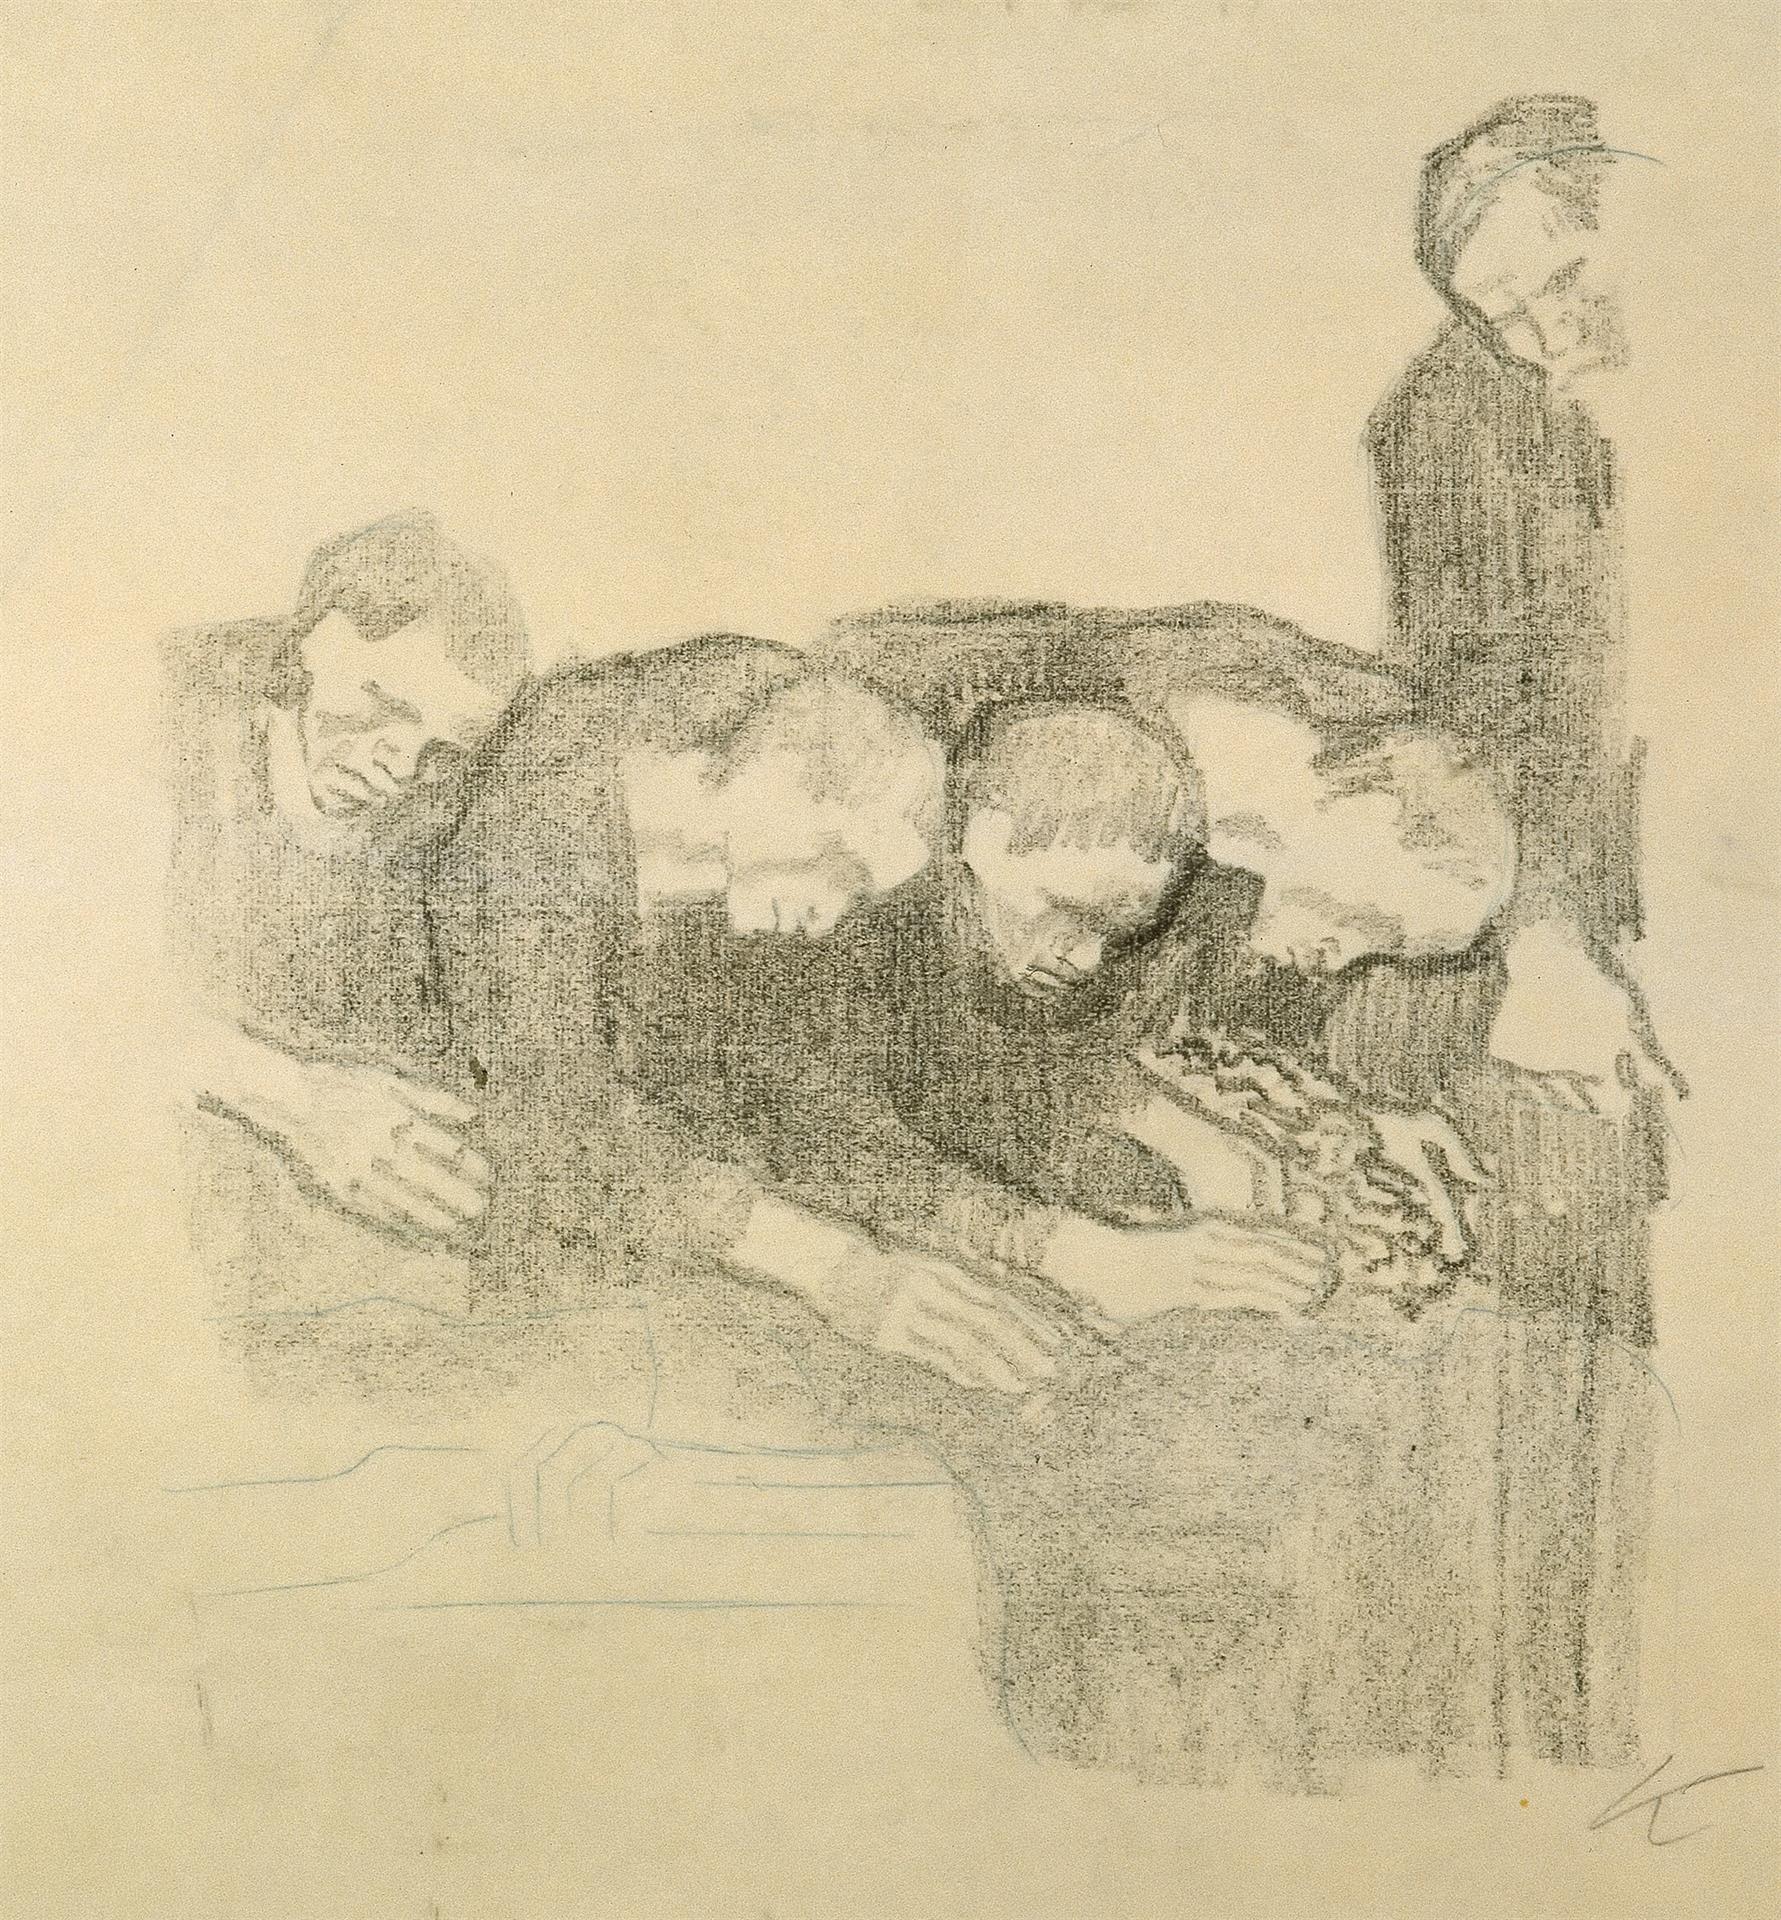 Käthe Kollwitz, In Memory of Ludwig Frank, rejected second version, 1914, crayon lithograph (transfer of an unknown drawing on ribbed laid paper), Kn 131, Cologne Kollwitz Collection © Käthe Kollwitz Museum Köln